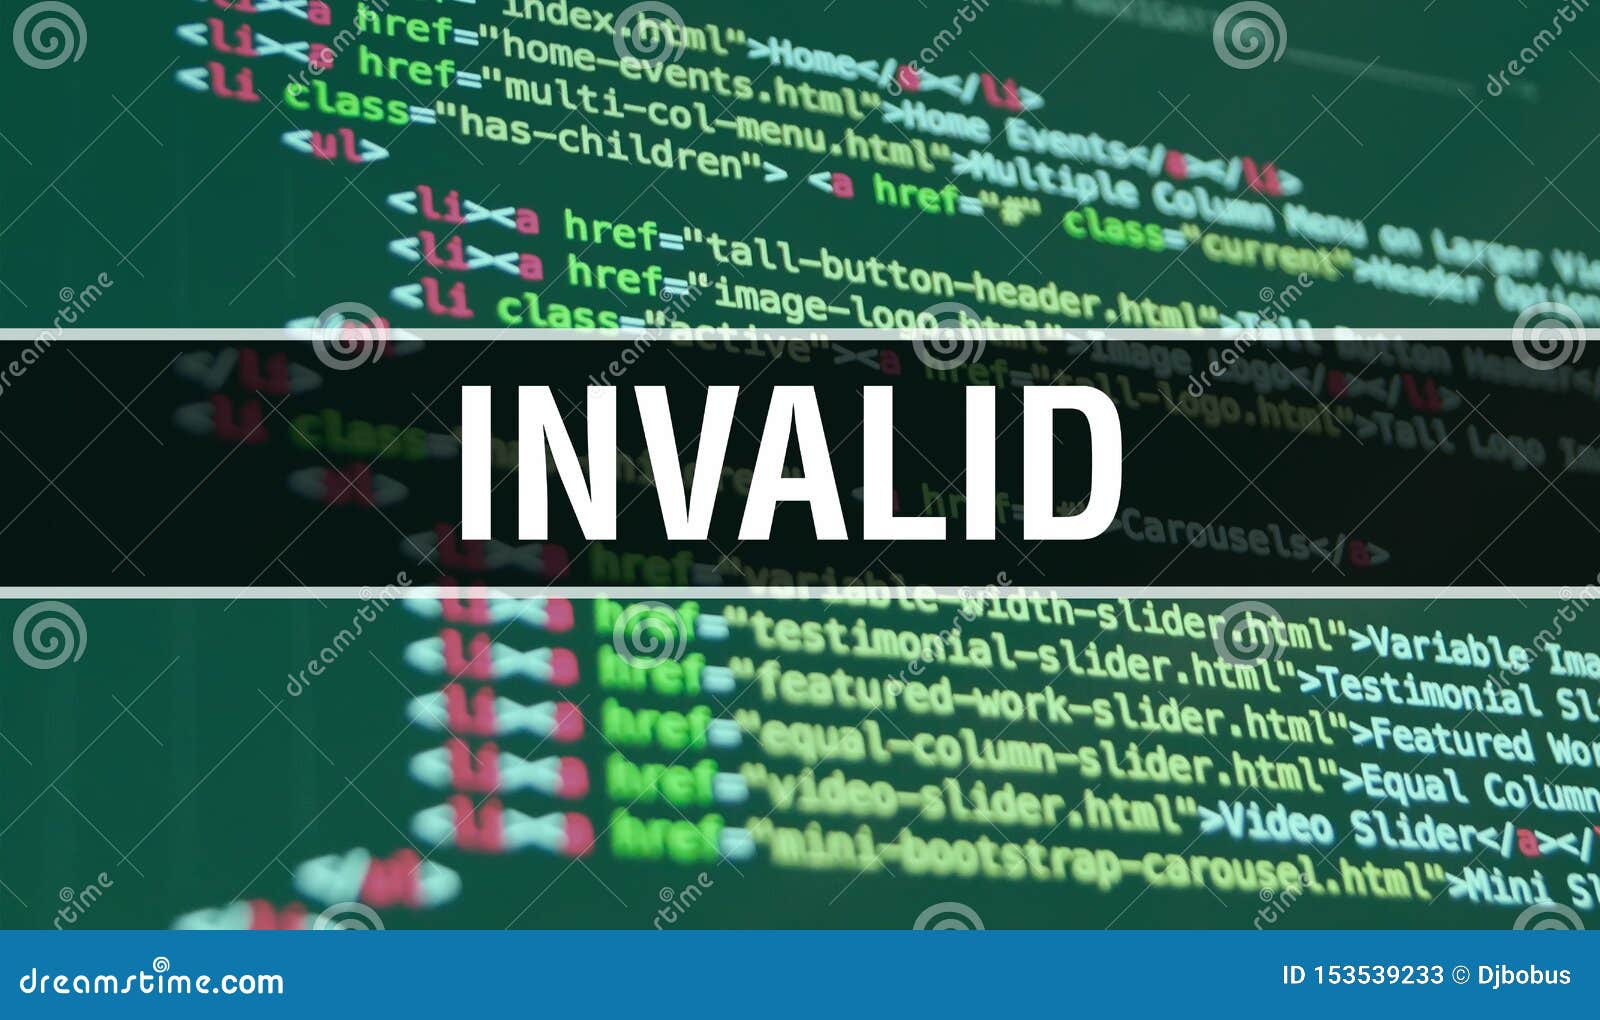 Invalid Concept Illustration Using Code For Developing Programs And App Invalid Website Code With Colourful s In Browser View Stock Illustration Illustration Of Number Computer